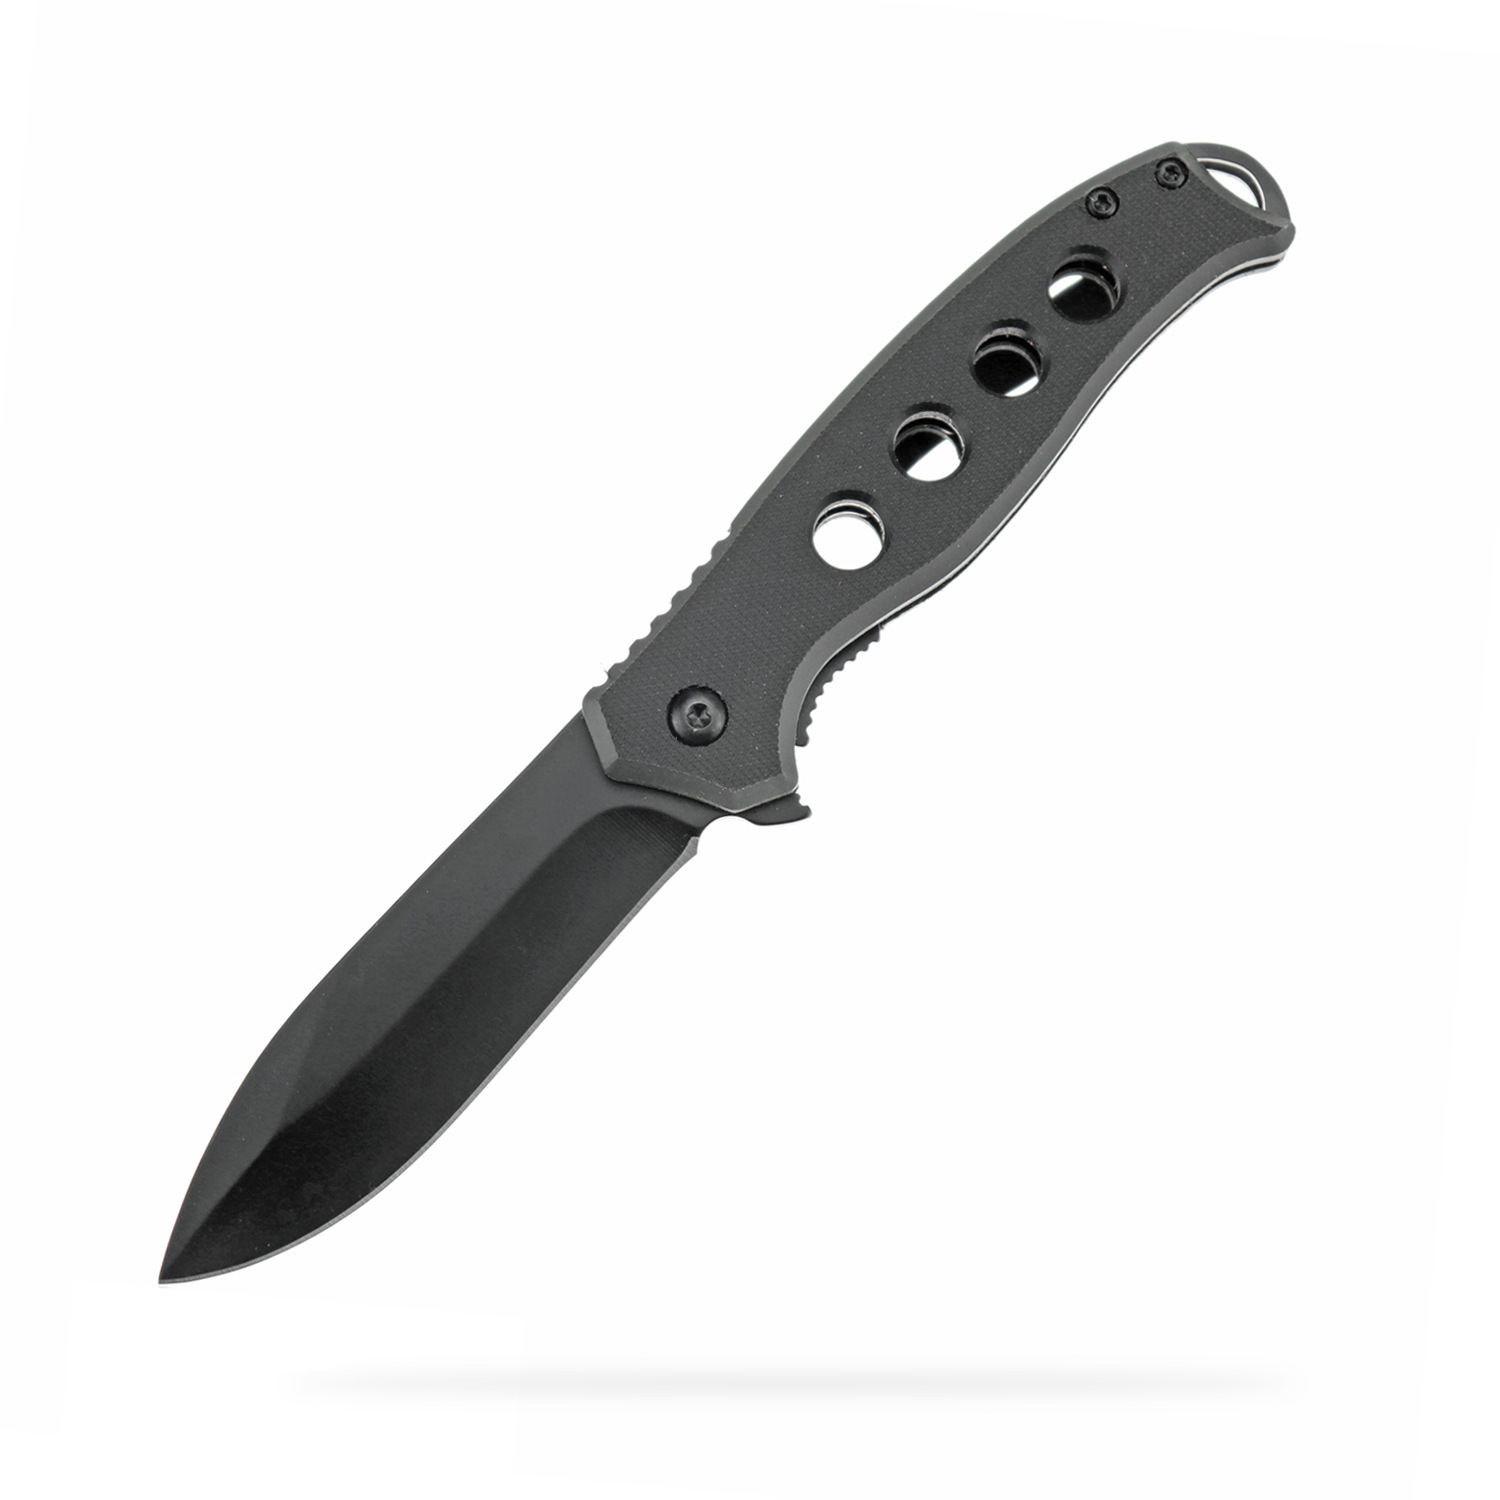 Manufacturers Wholesale Outdoor Folding Knife Blackened Treatment All Black Folding Knife Camping Self-Defense Knife Camping Tools Field Survival